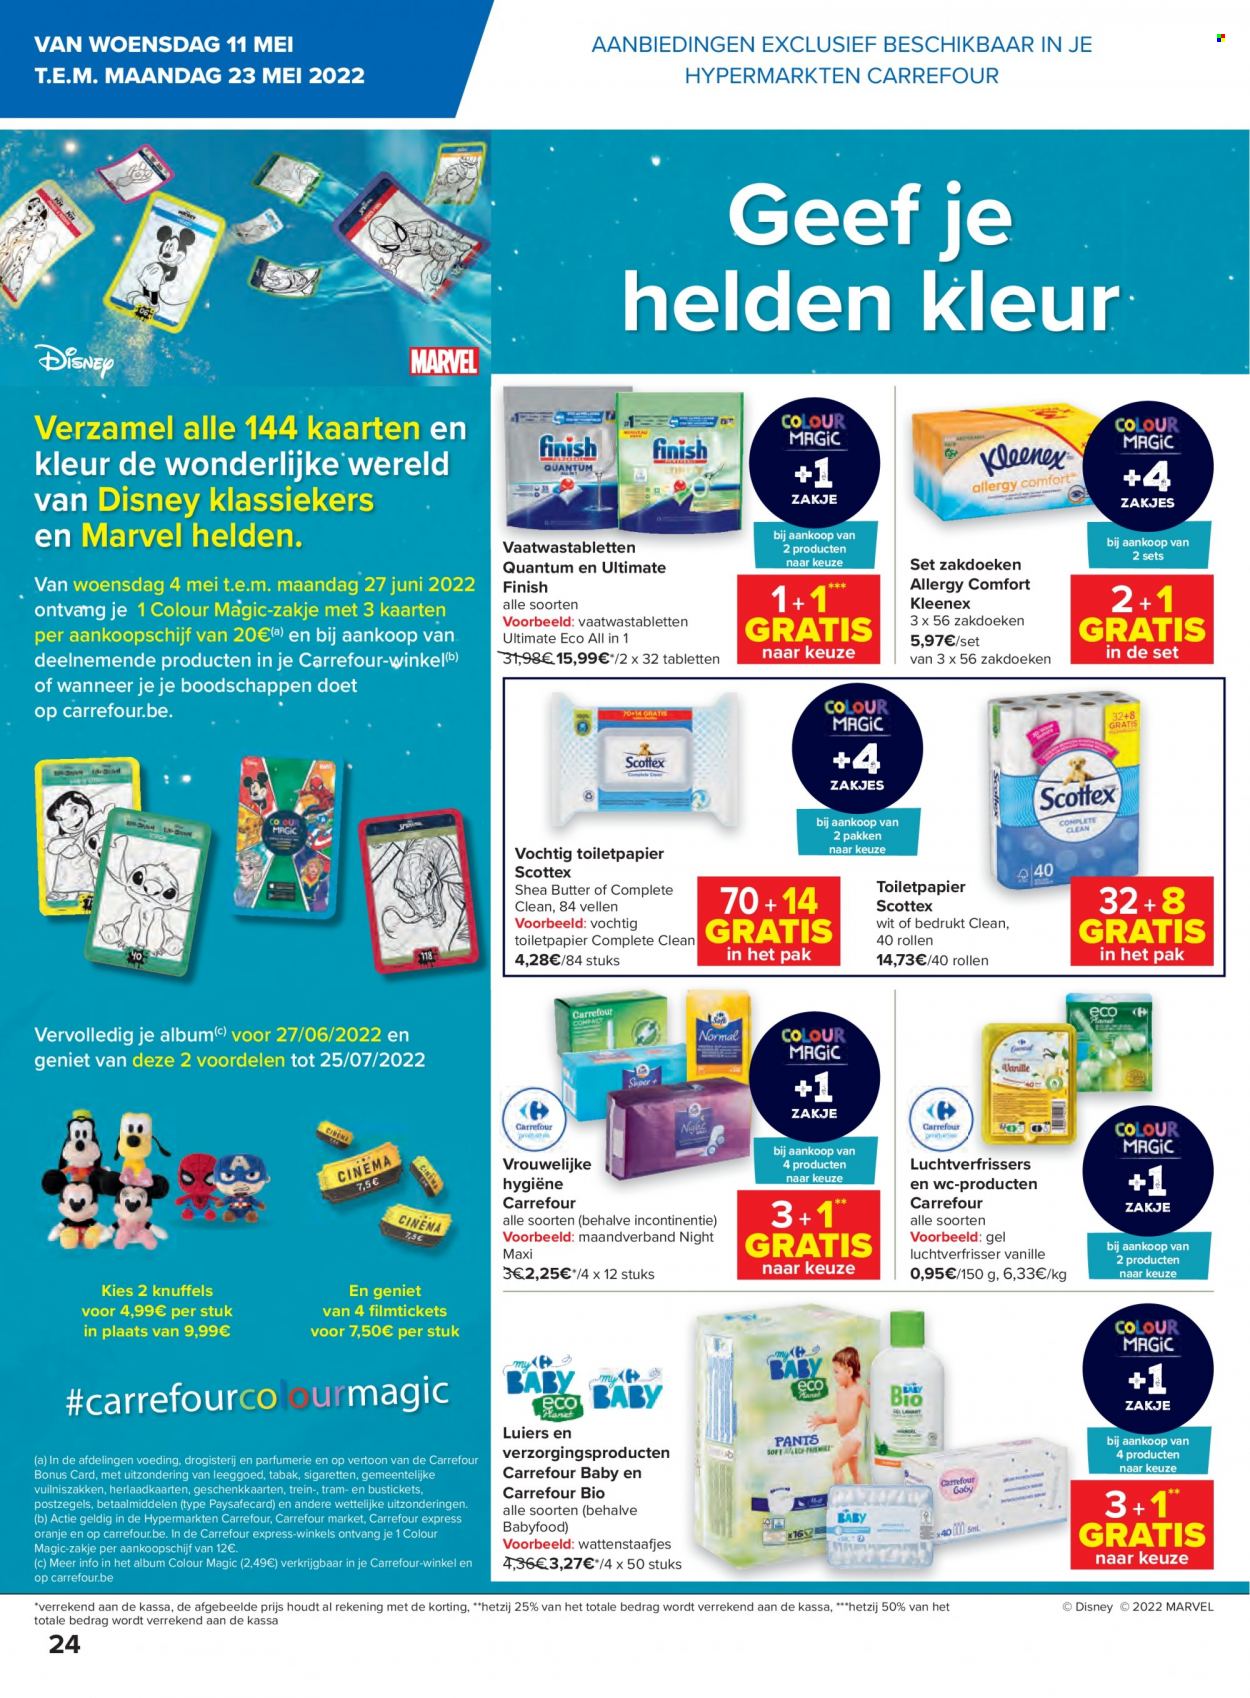 Catalogue Carrefour hypermarkt - 11.5.2022 - 23.5.2022. Page 24.